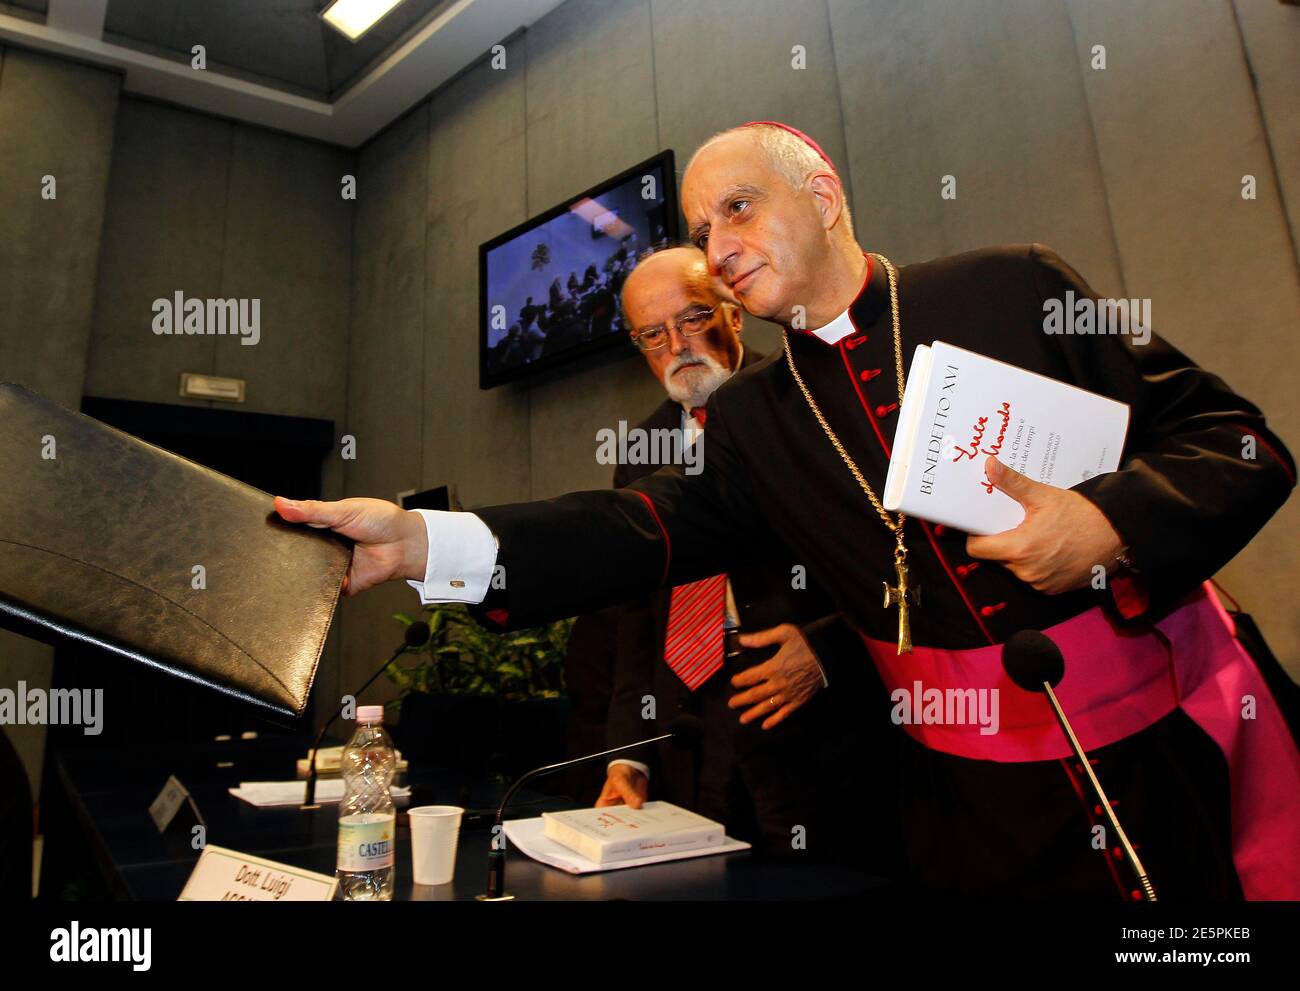 Archbishop Rino Fisichella (R) holds a new book about Pope Benedict XVI  as he leaves at the end of a news conference at the Vatican November 23, 2010. Pope Benedict says in the new book, called 'Light of the World: The Pope, the Church, and the Sign of the Times', that he would not hesitate to become the first pontiff to resign willingly in more than 700 years if he felt himself no longer able, 'physically, psychologically and spiritually', to lead the church. The book, an interview with German Catholic journalist Peter Seewald, has so far made headlines for the pope's cautious opening to the Stock Photo